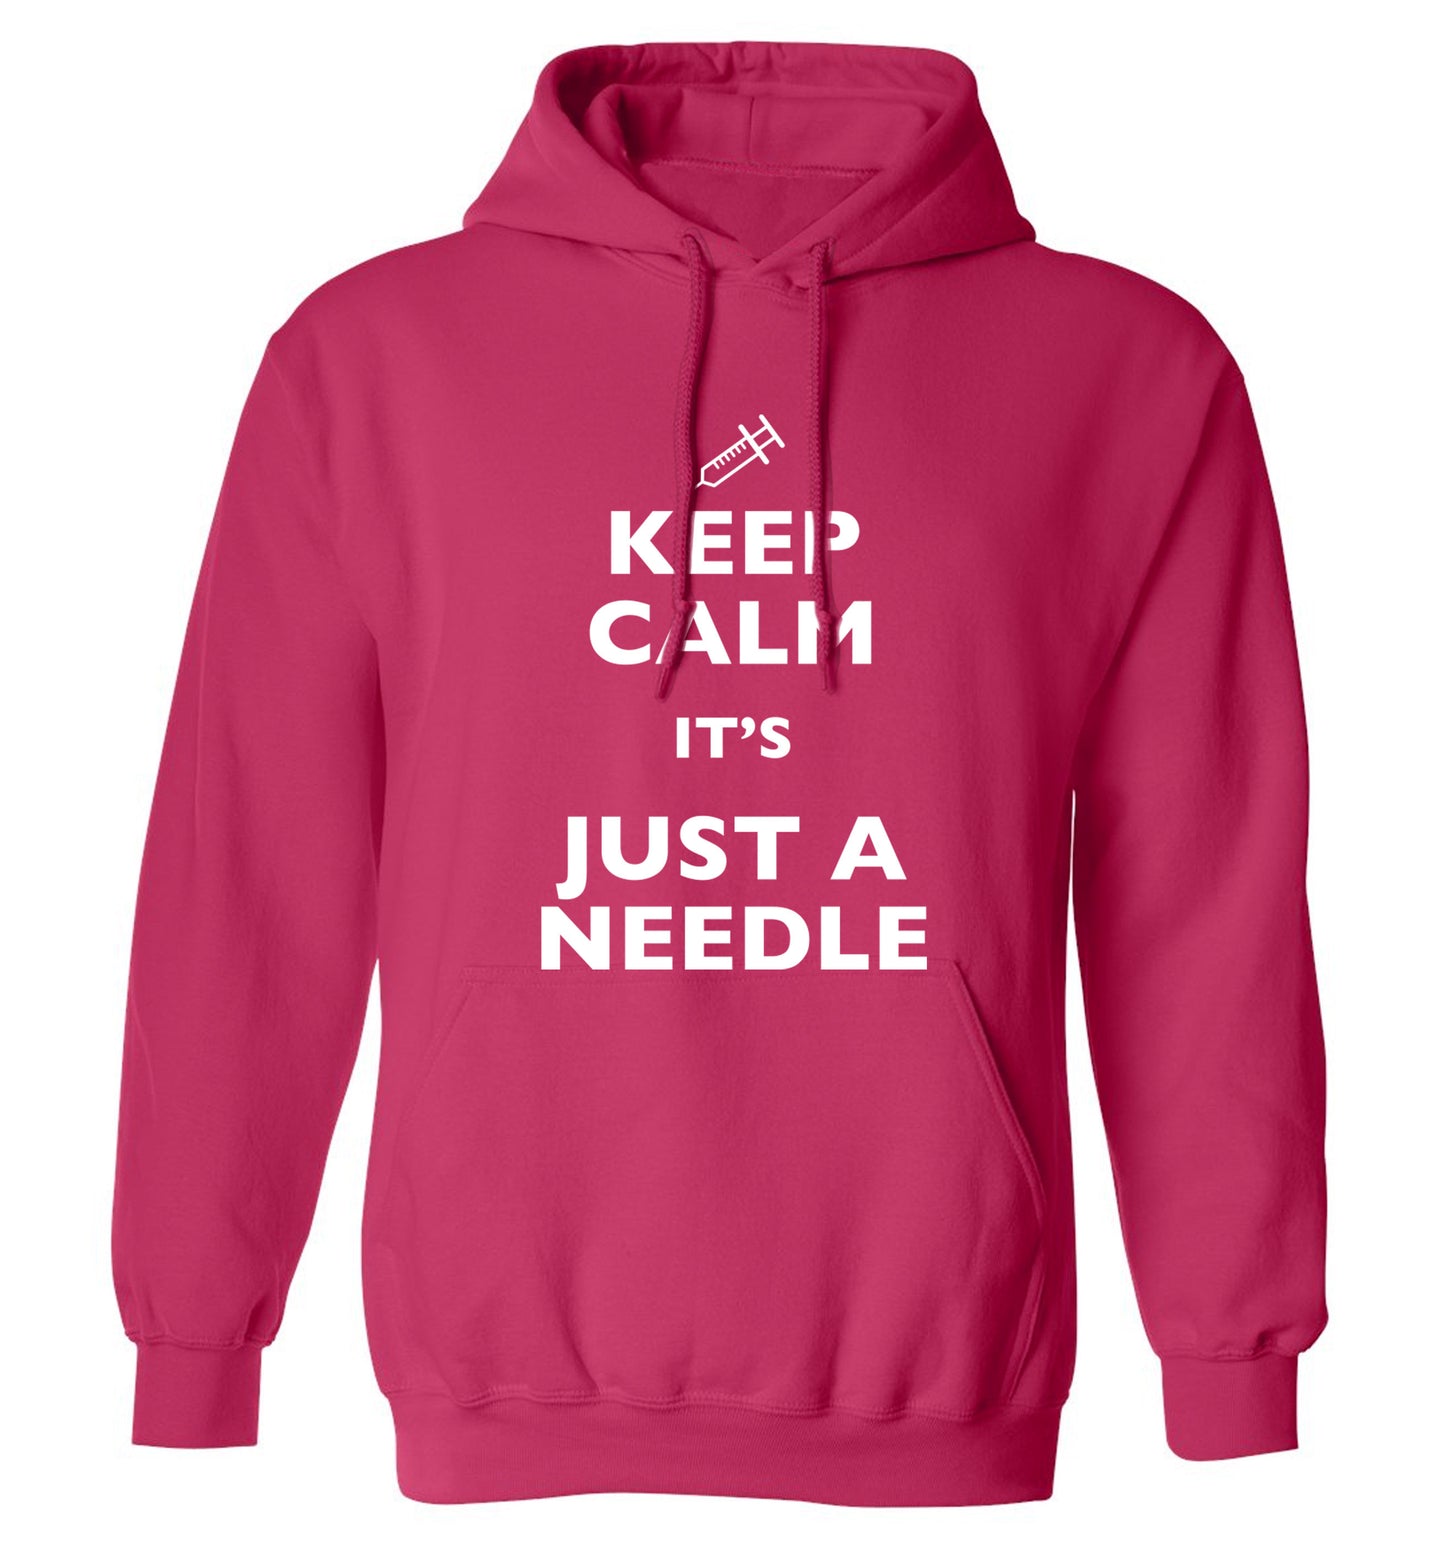 Keep calm it's only a needle adults unisex pink hoodie 2XL